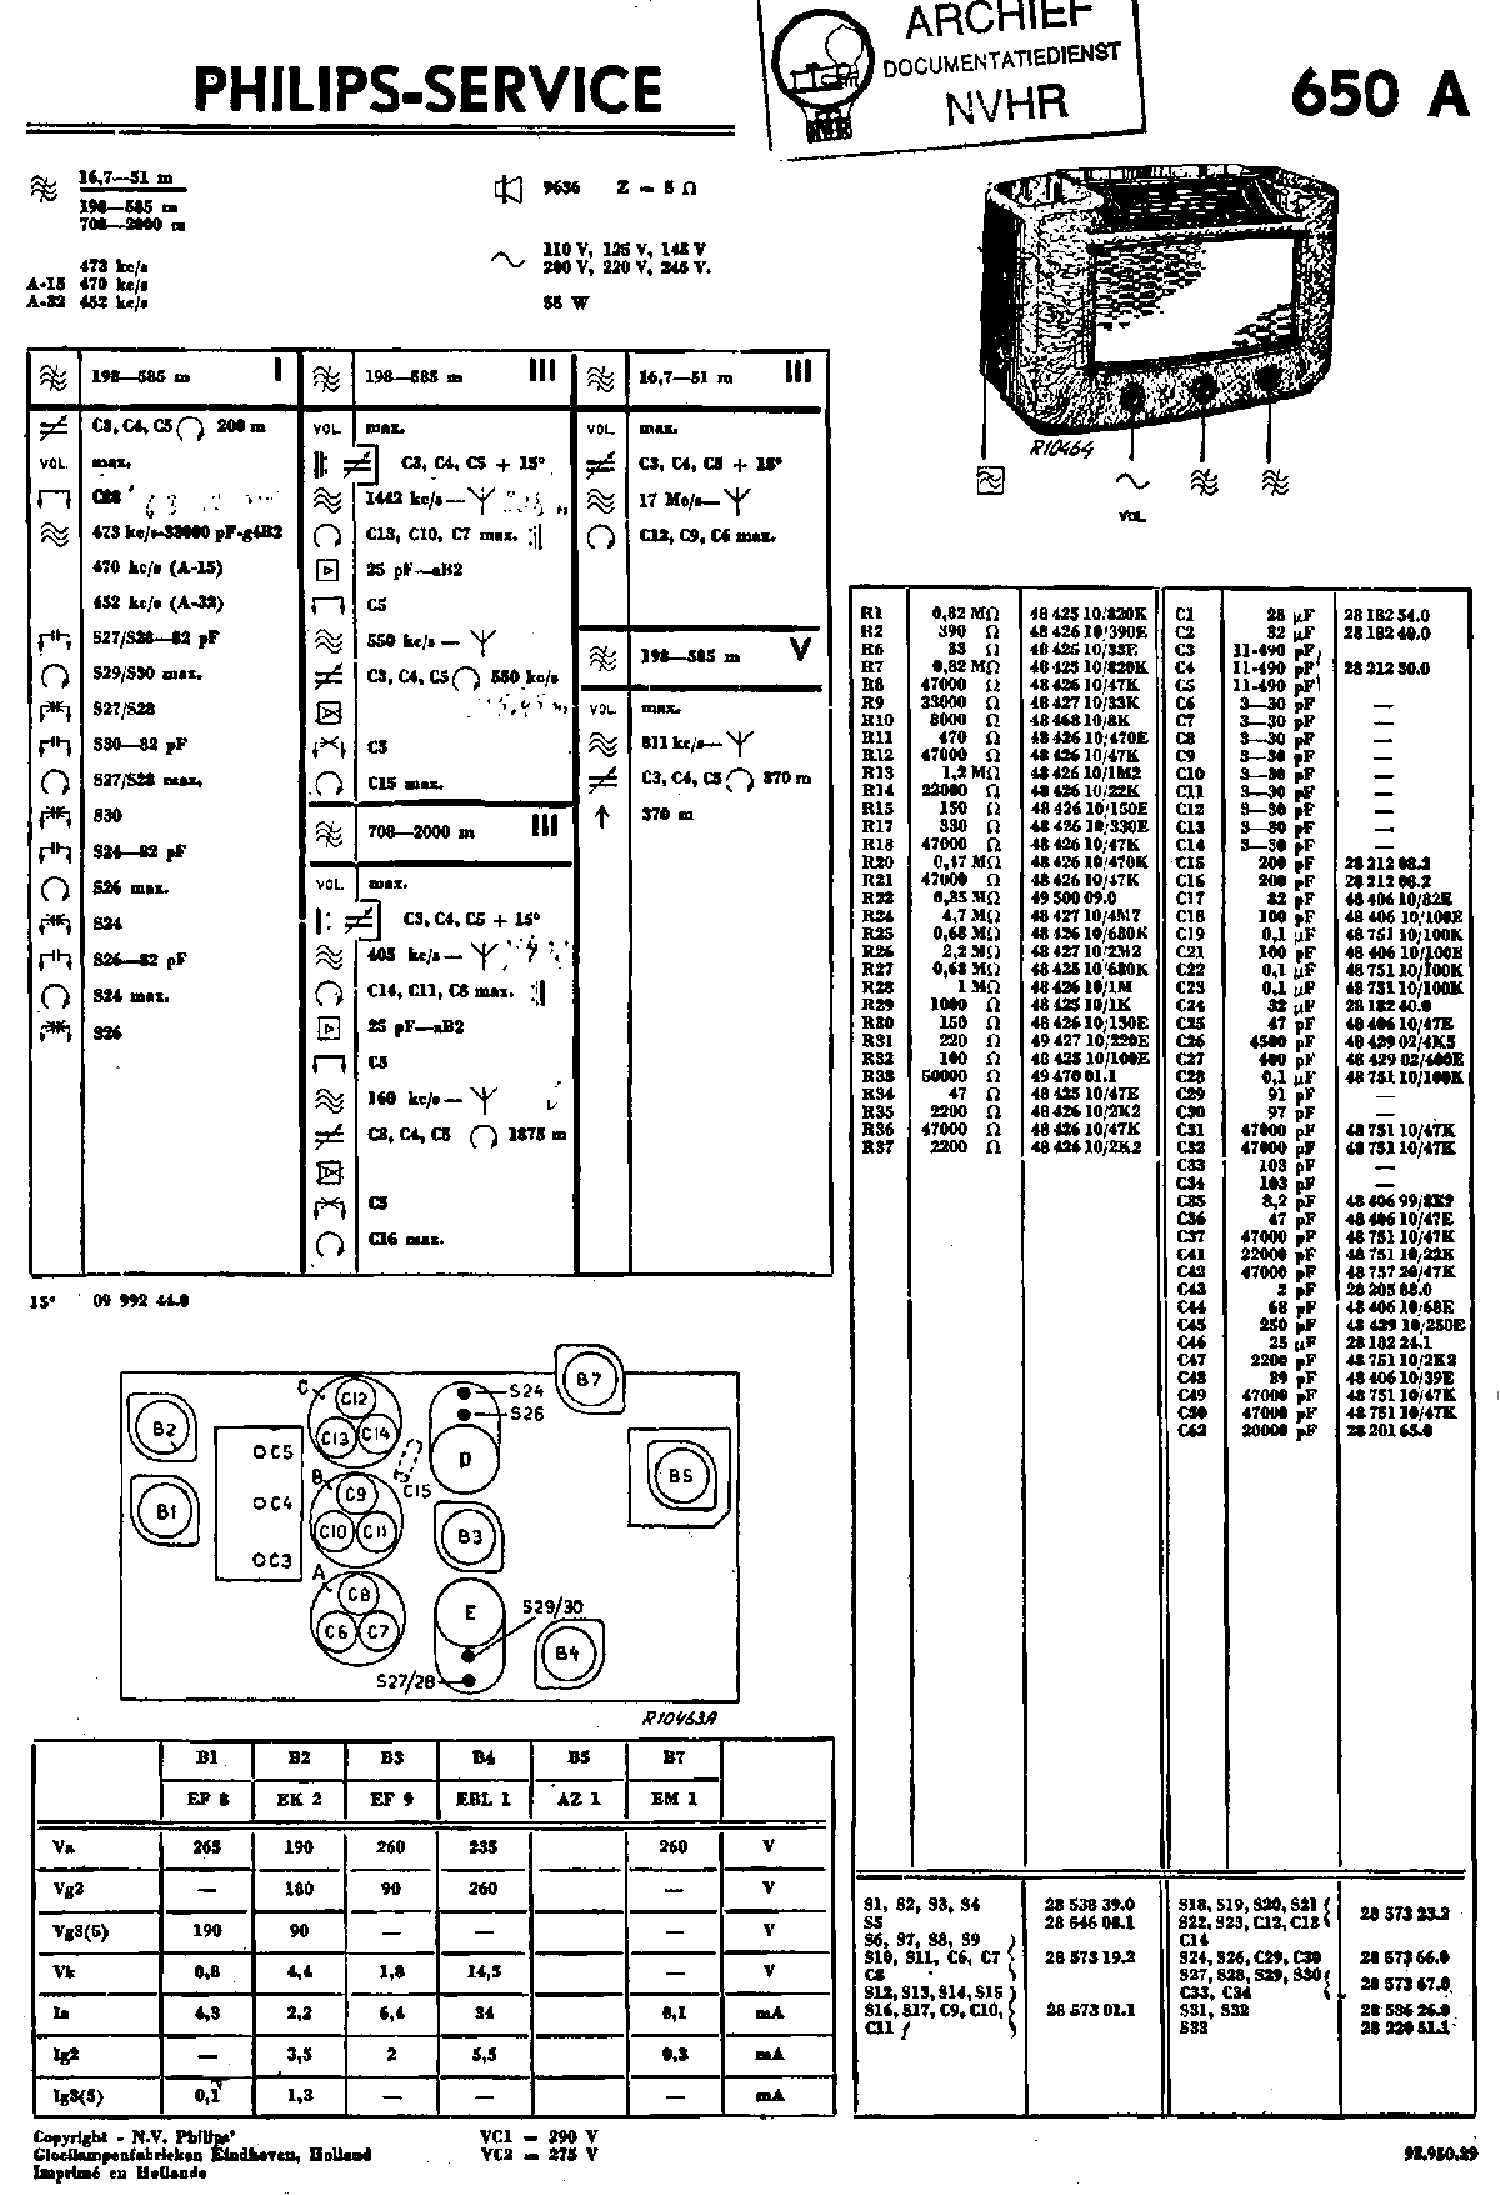 PHILIPS 650A AC RECEIVER SM service manual (1st page)